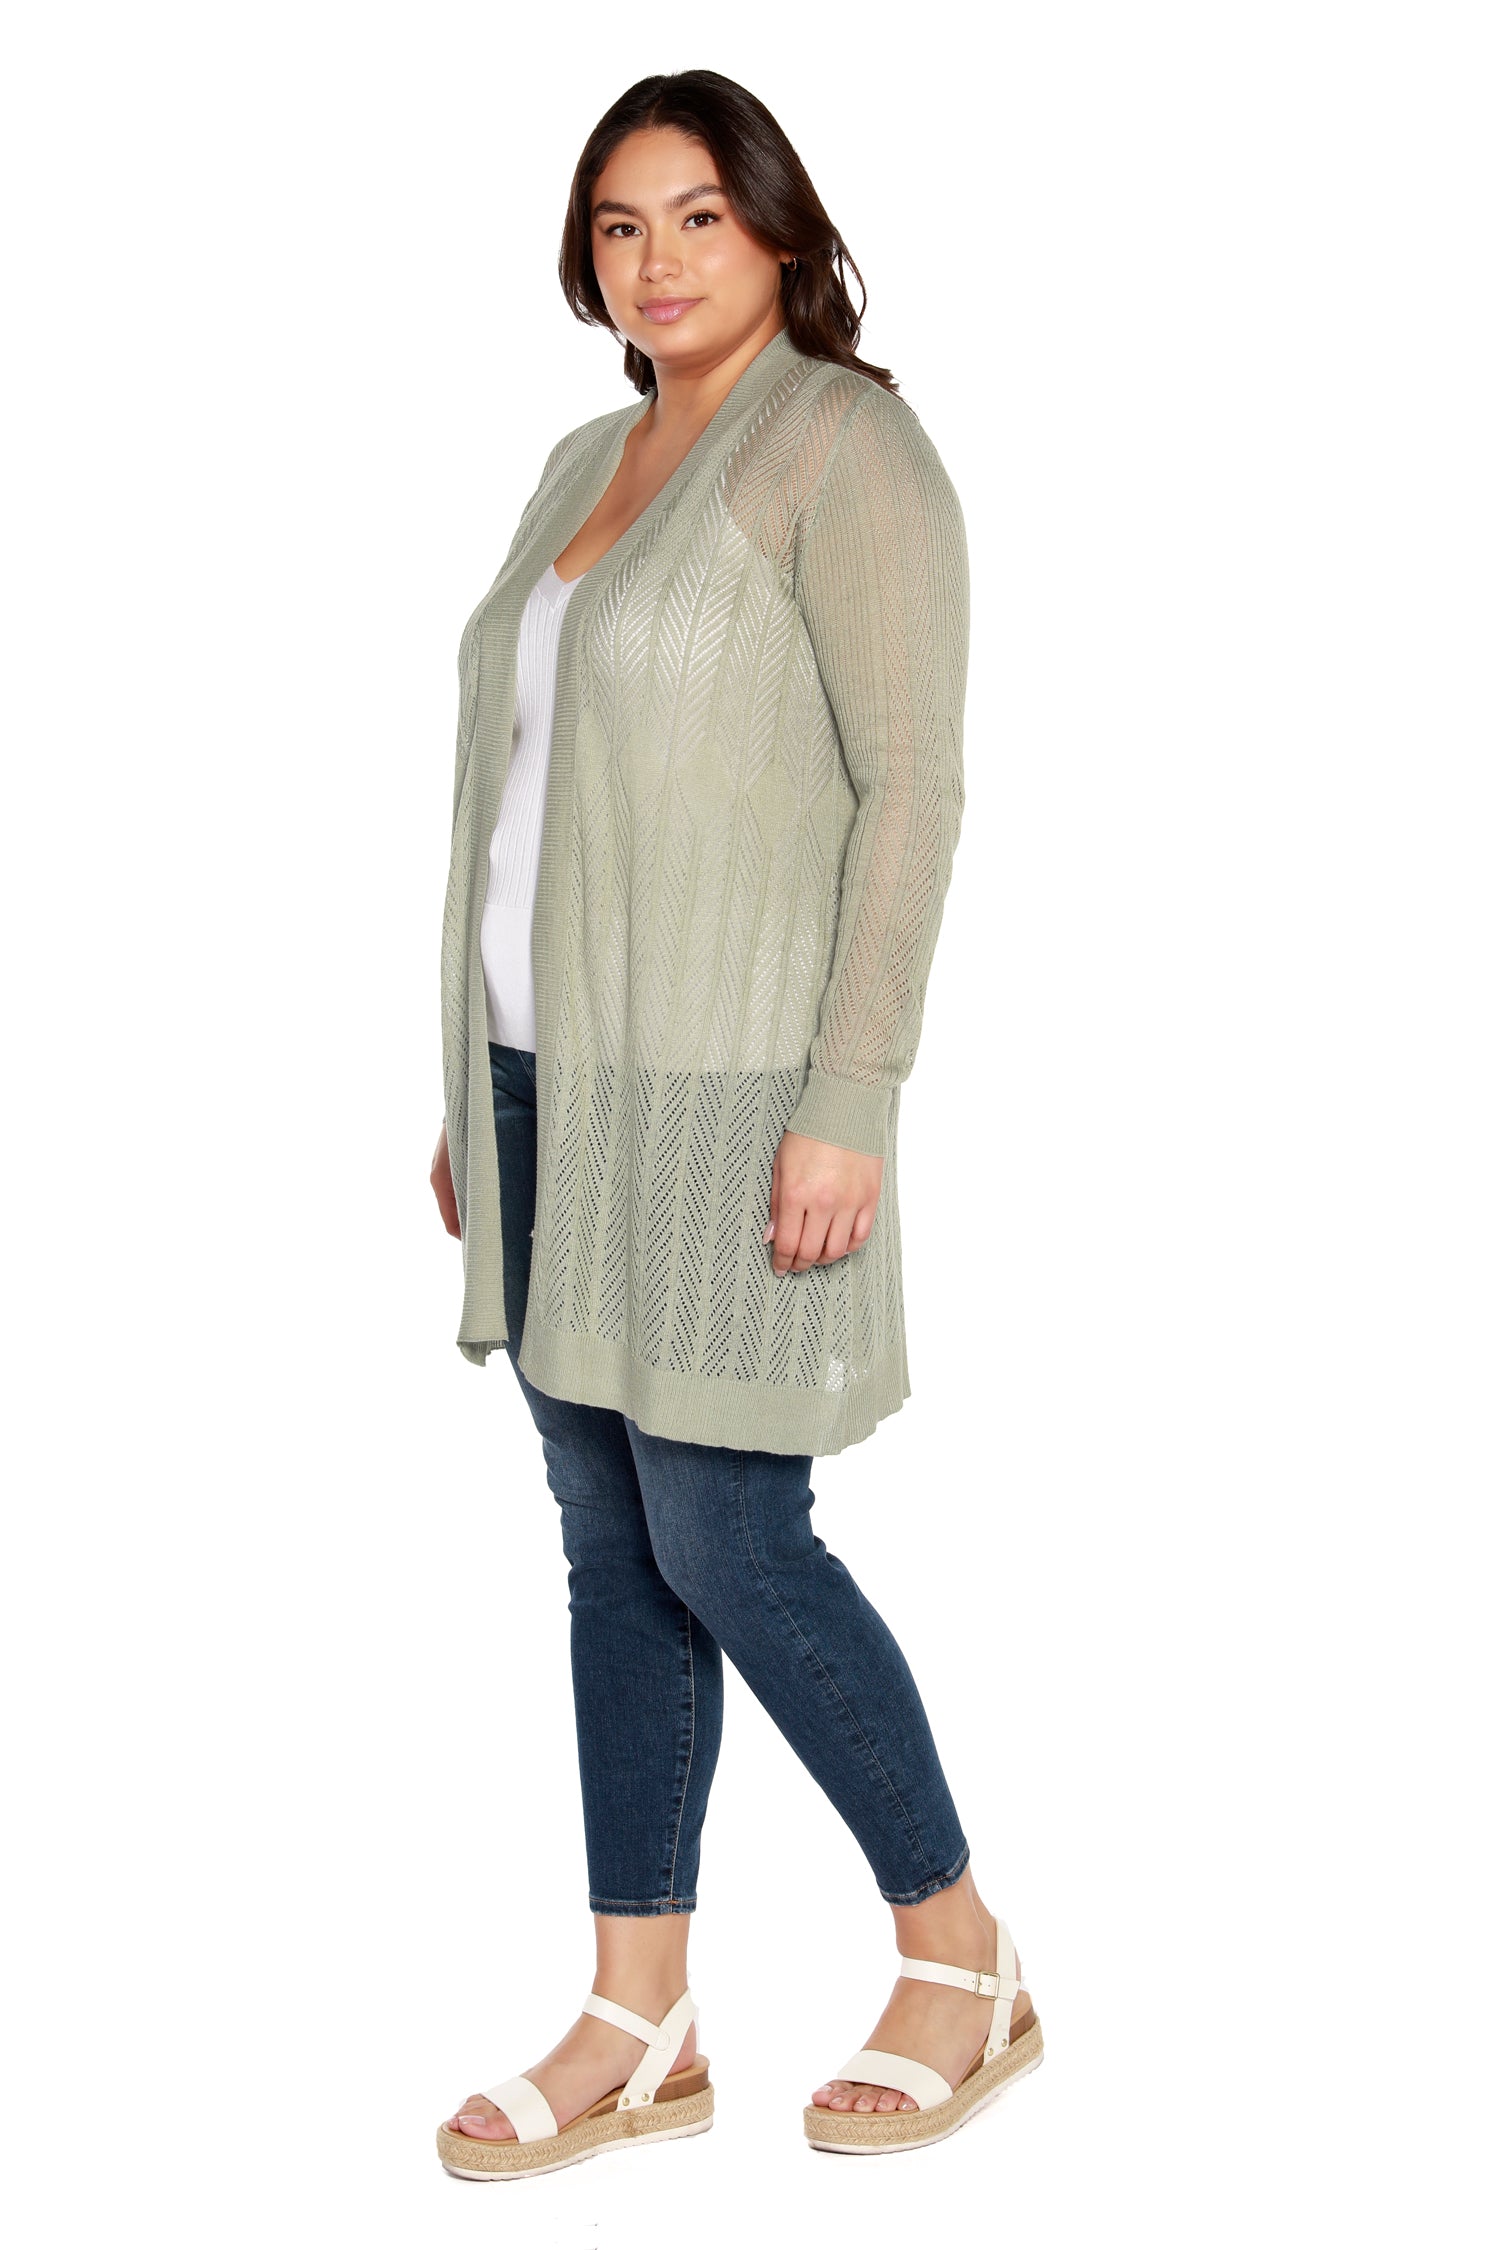 Women’s Sheer Long Cardigan with Crochet Chevron Stripes and Pointelle Stitch | Curvy